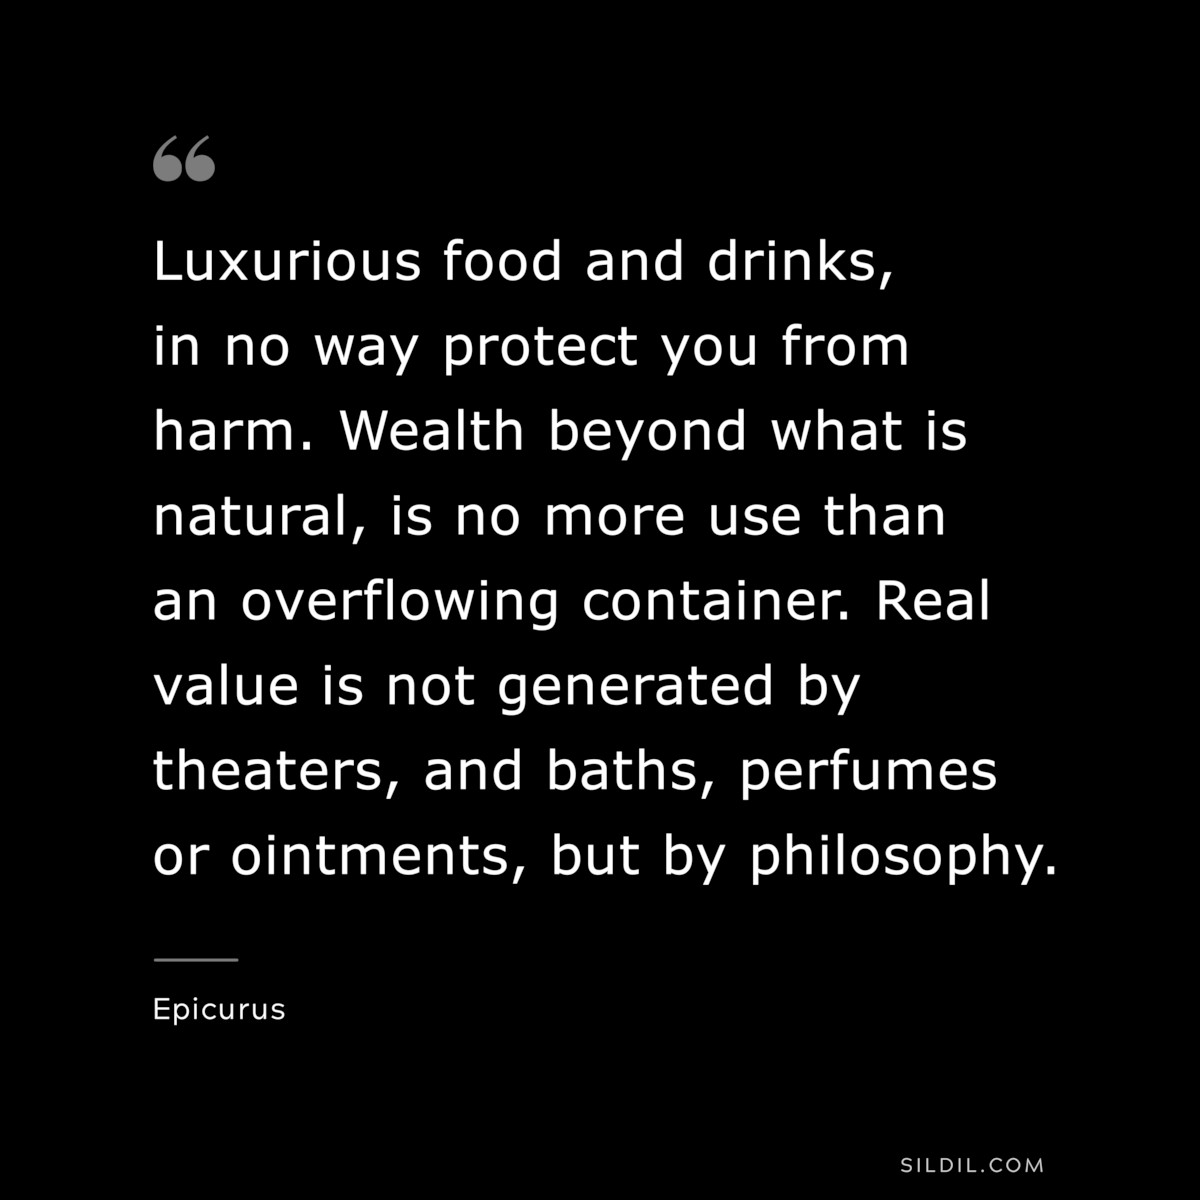 Luxurious food and drinks, in no way protect you from harm. Wealth beyond what is natural, is no more use than an overflowing container. Real value is not generated by theaters, and baths, perfumes or ointments, but by philosophy. — Epicurus